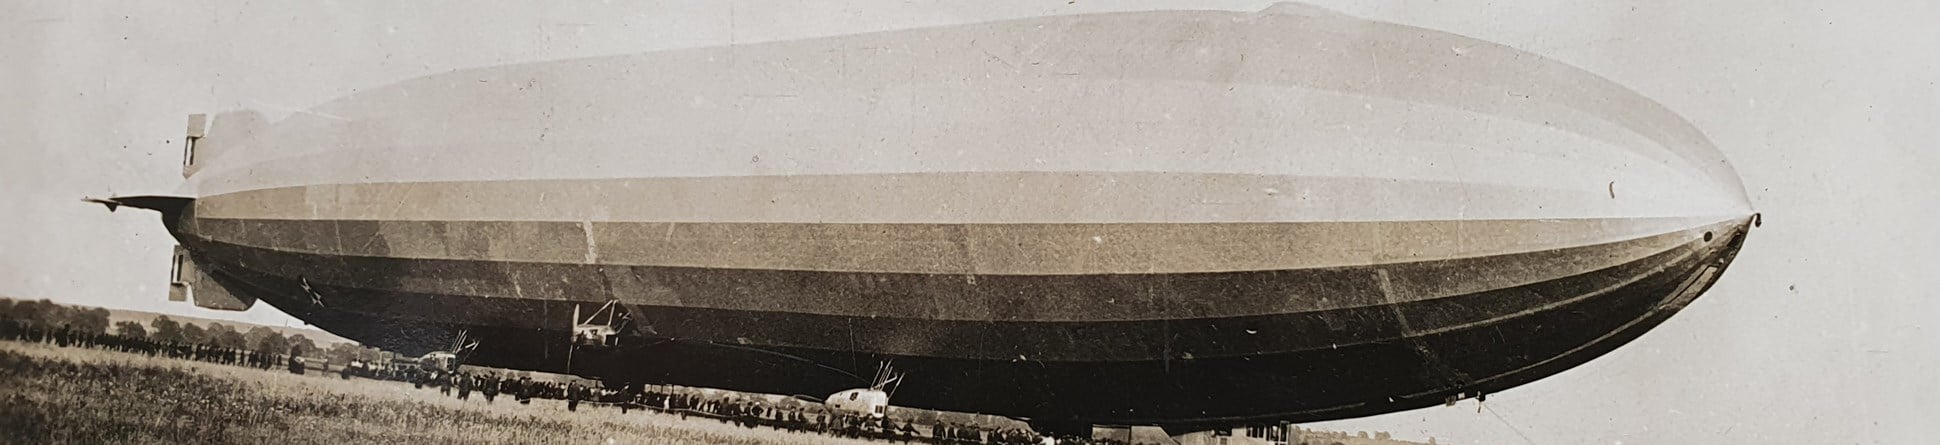 Black and white photo of Airship R.38/ZR 2 preparing for flight. The foreground is flat grassland. The airship sits on the horizon which has a line of dark specks along its entire length. Looking closer, the specks are people, some holding ropes. Hand written text on the bottom edge reads: "R.38. Ready for flight at Howden"